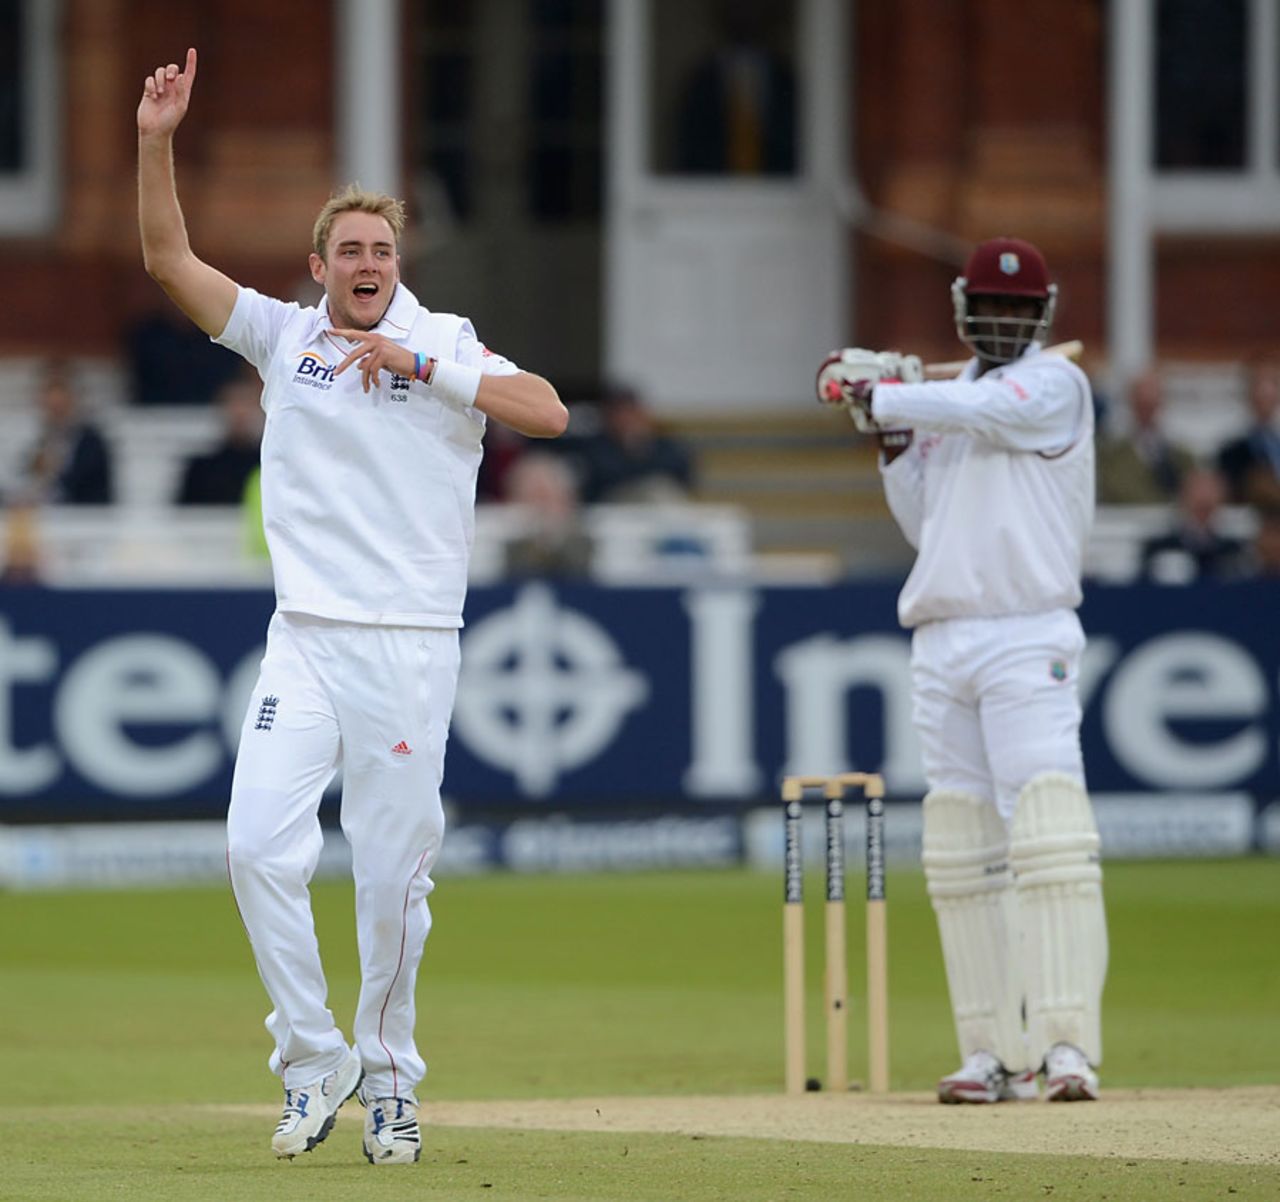 Stuart Broad claimed a few more landmarks with the ball, England v West Indies, 1st Test, Lord's, 4th day, May 20, 2012